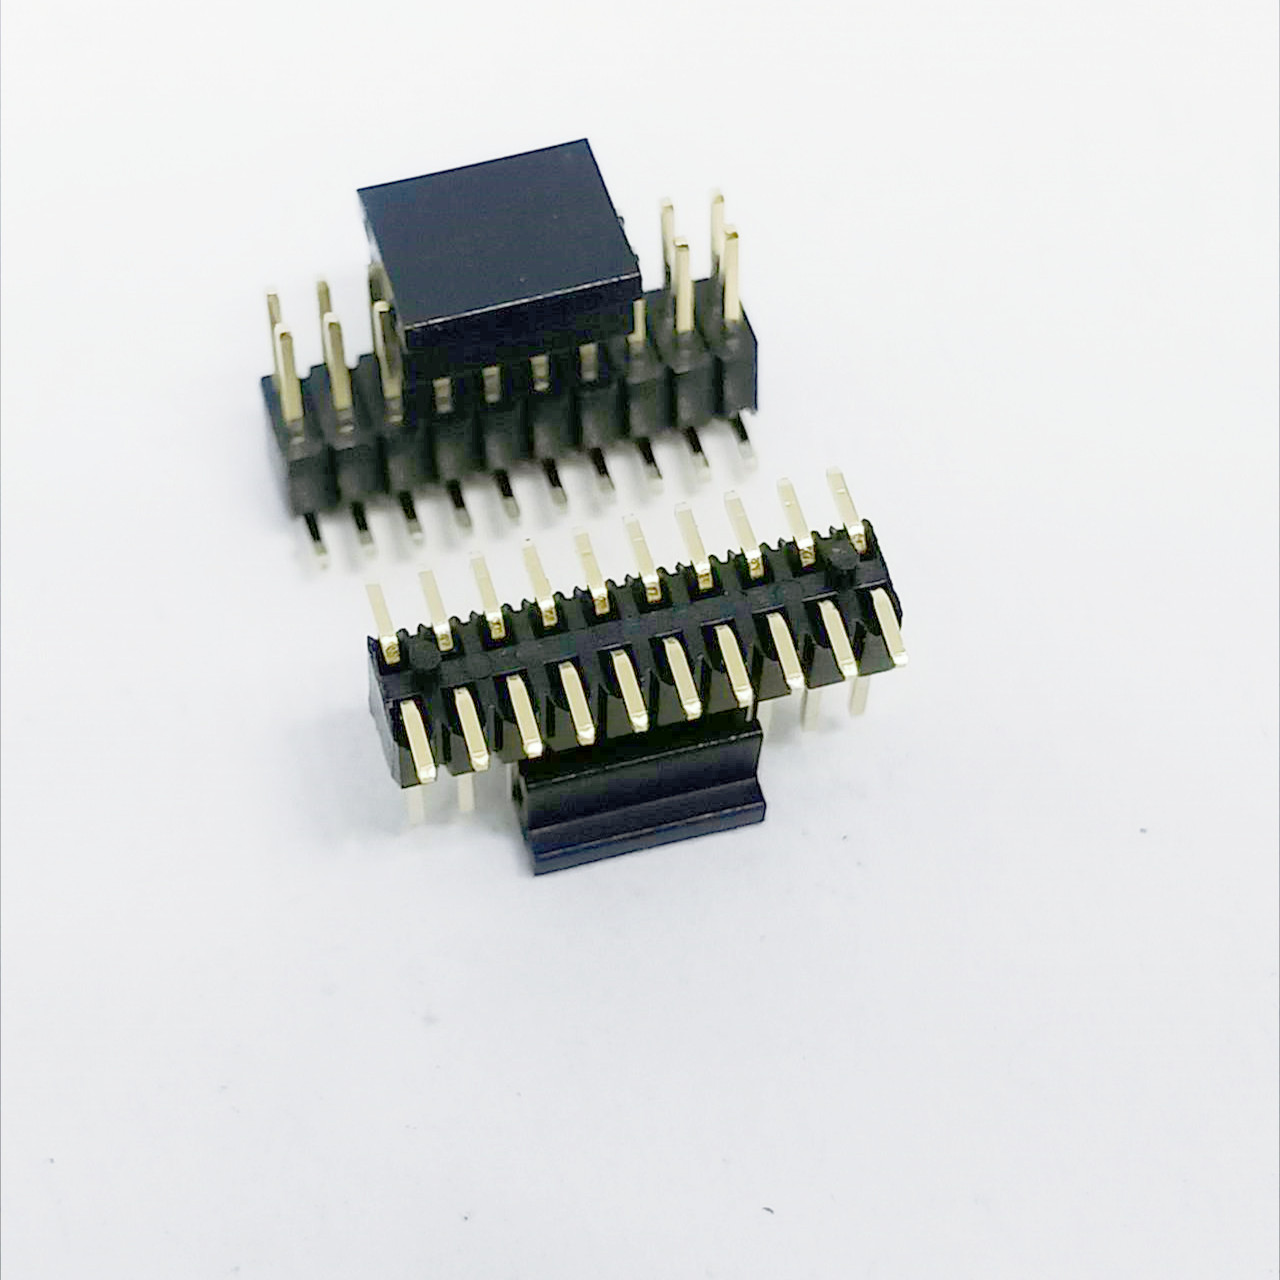 surface mount pin header is an electrical connector designed for surface-mount technology applications. 